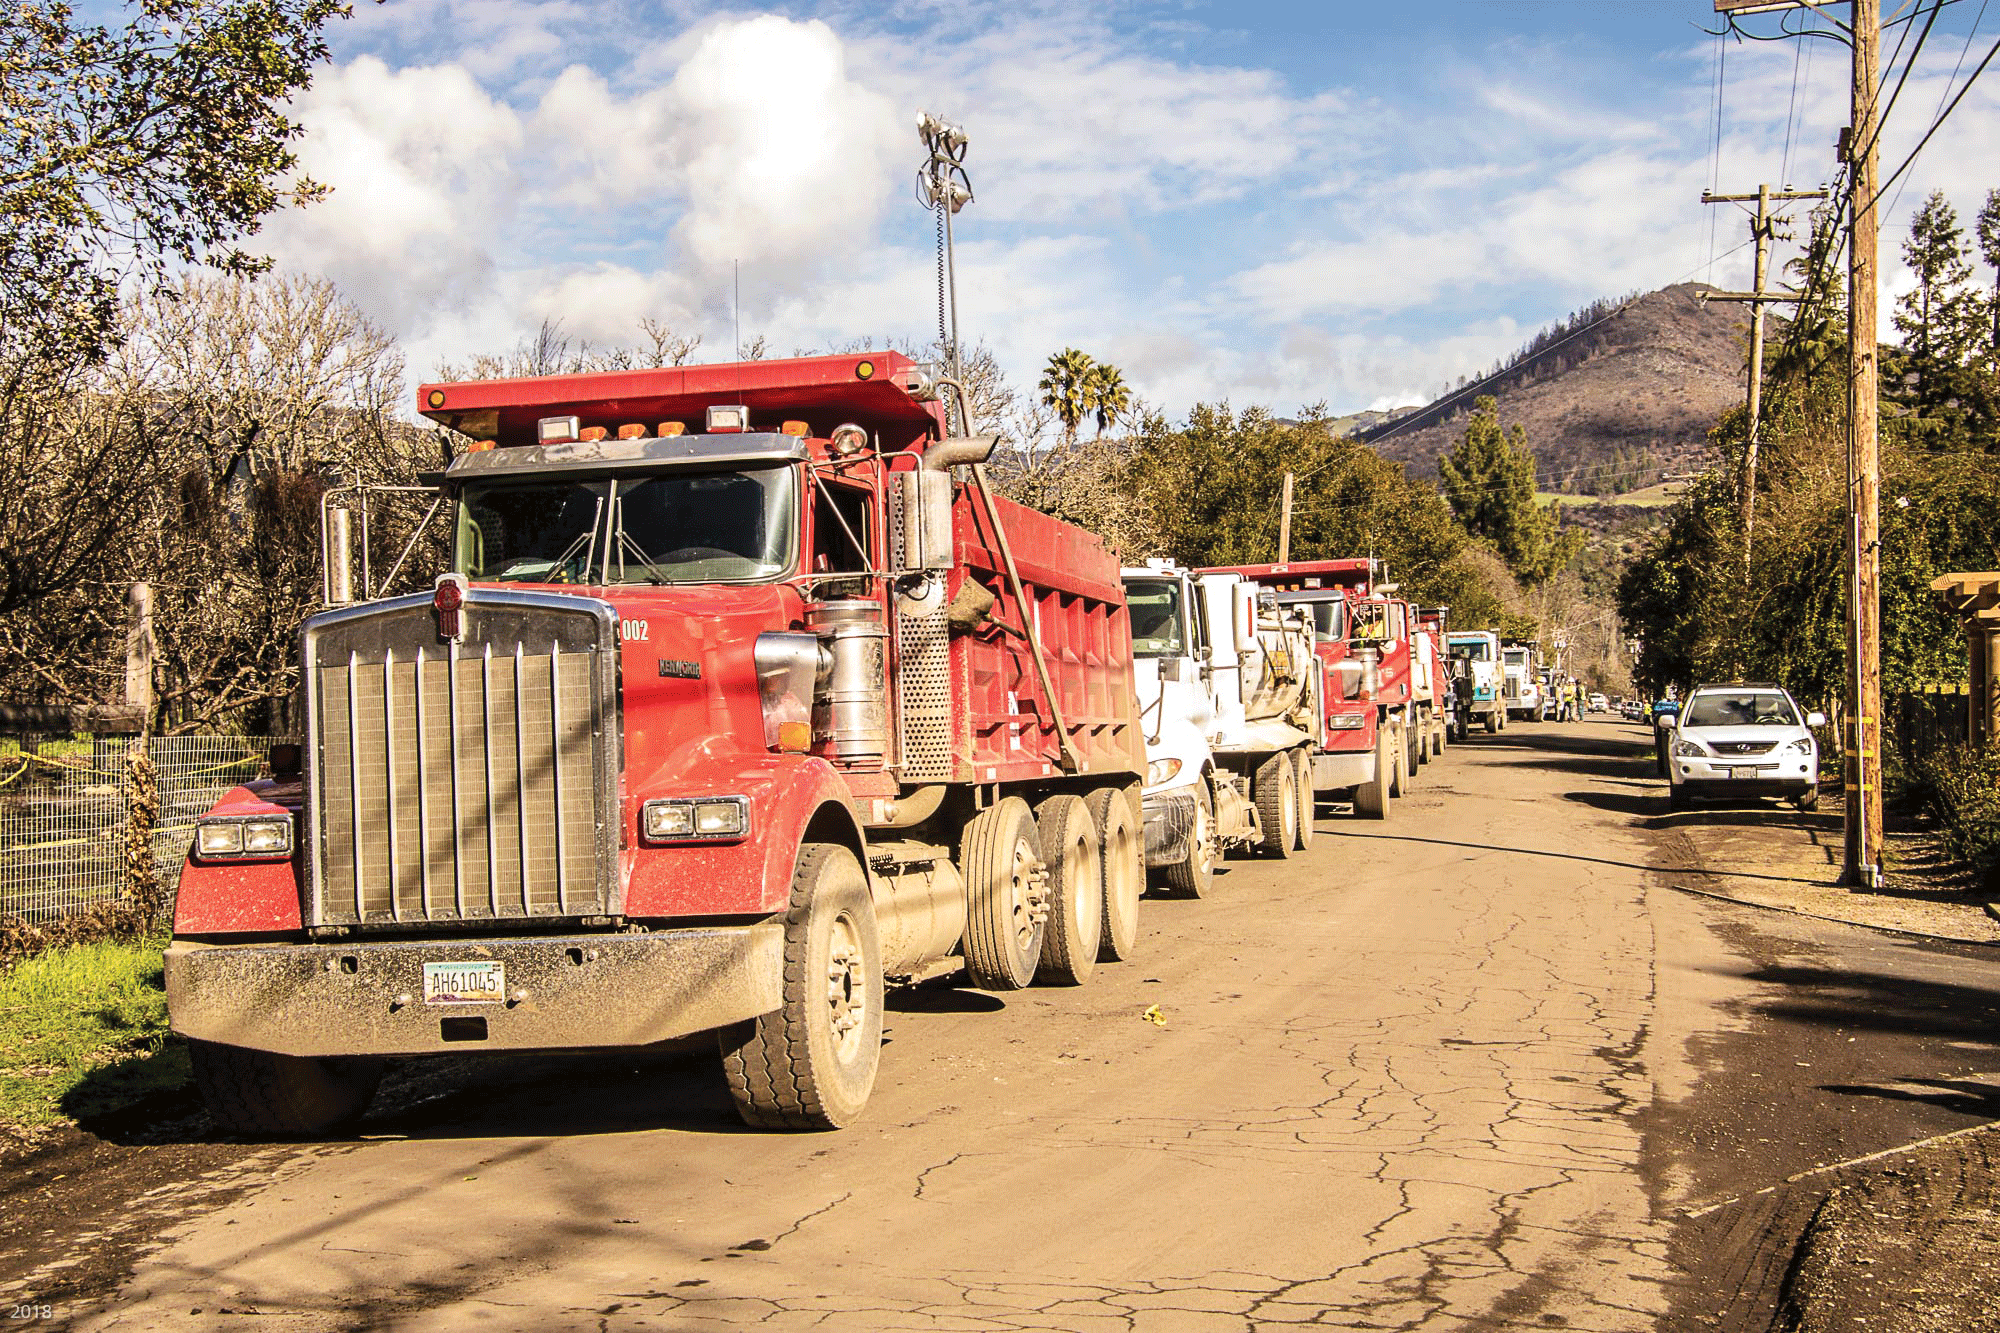 A row of dump trucks parked on the side of a narrow road, with a charred hillside in background